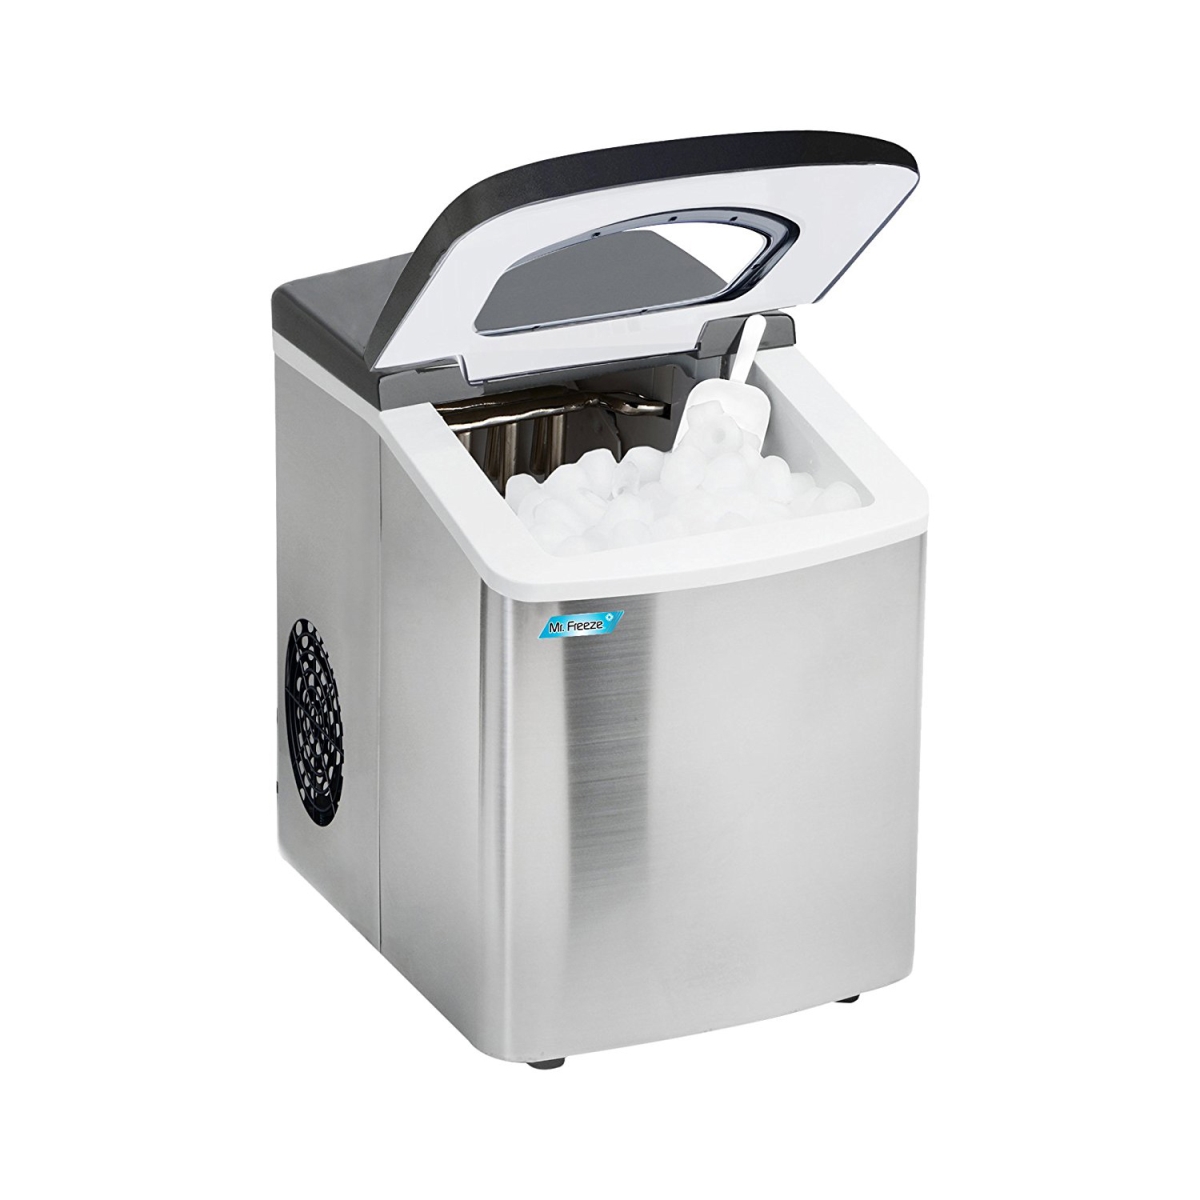 Mim18 9 Bullet Maximatic Portable Ice Maker, Stainless Steel